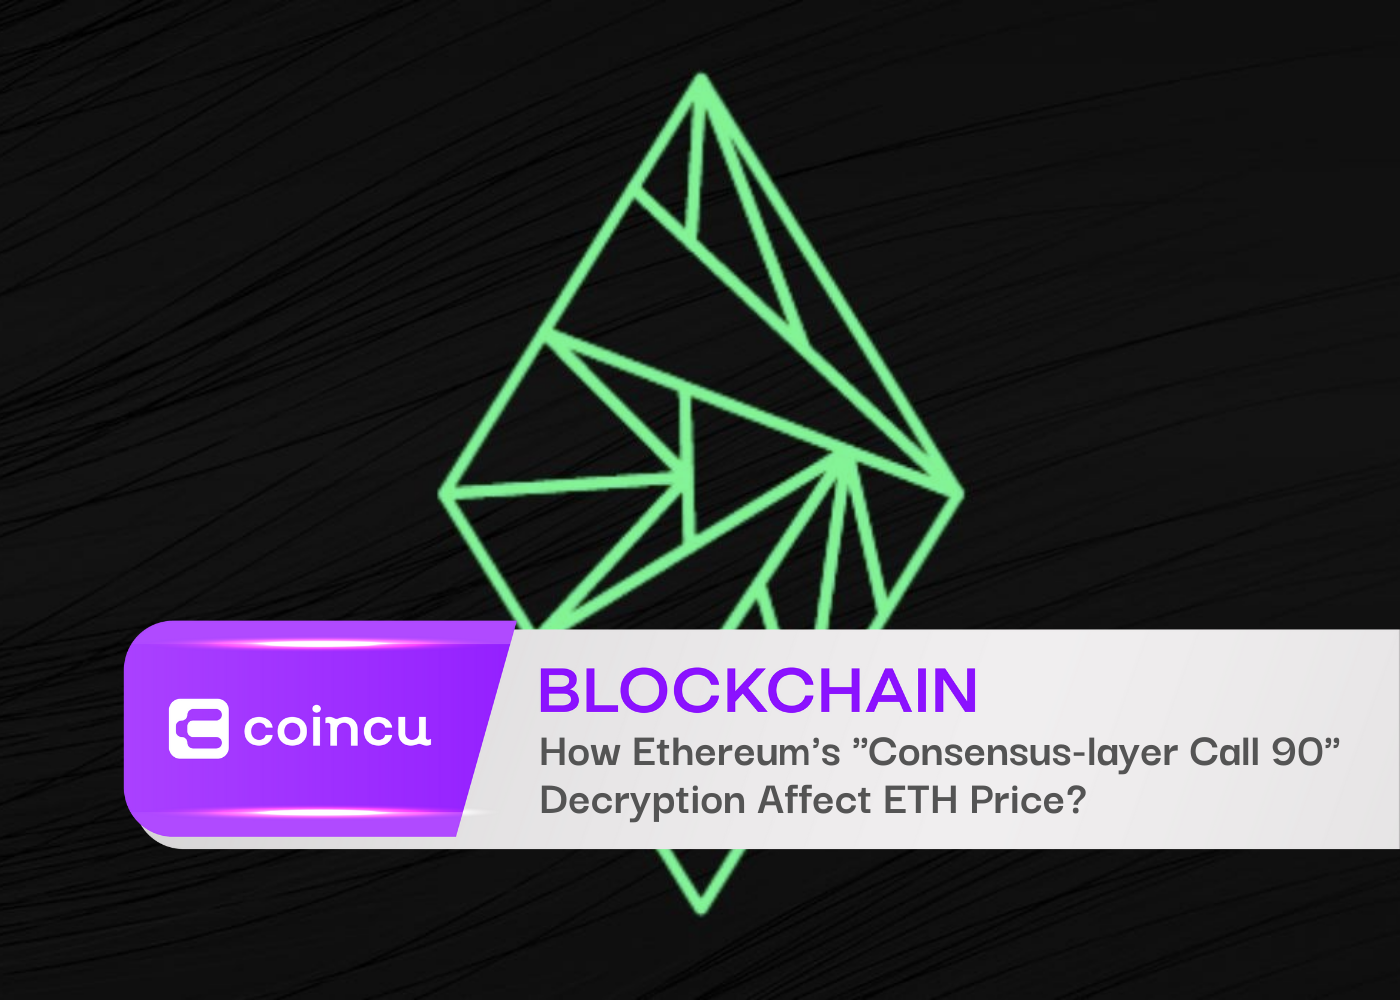 How Ethereum's "Consensus-layer Call 90" Decryption Affect ETH Price?